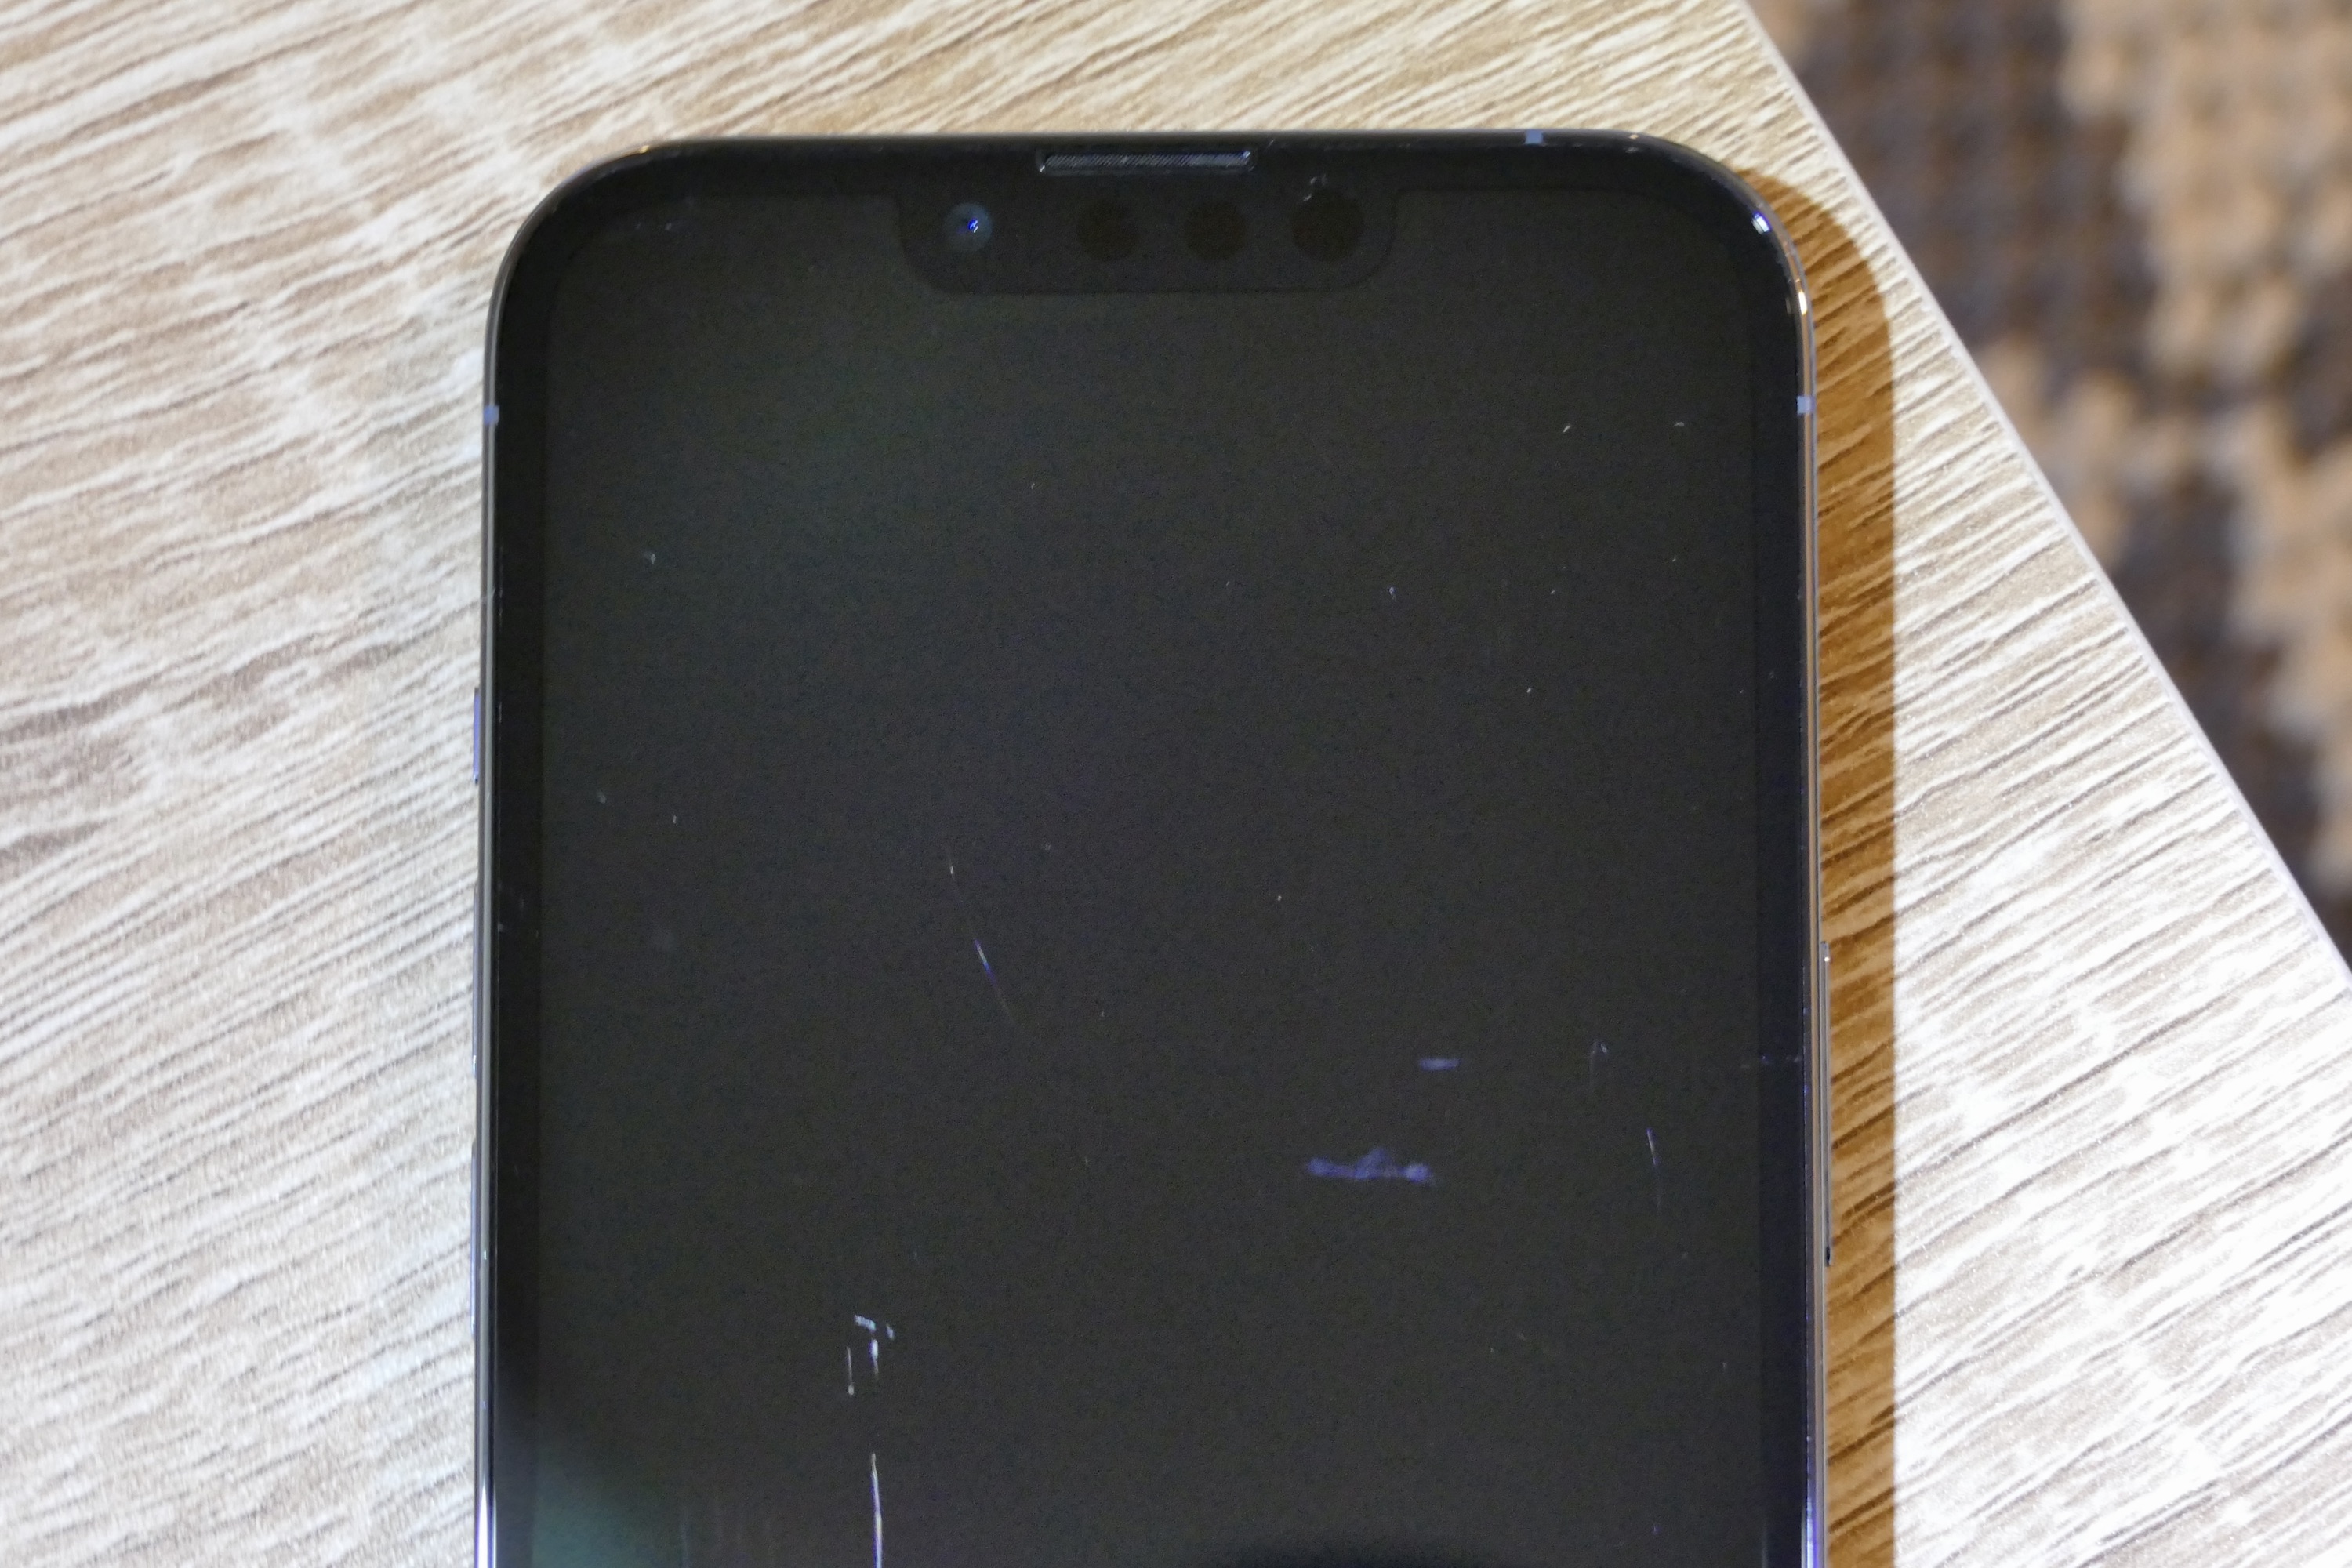 The top of an iPhone 13 Pro showing the Ceramic Shield glass performance.